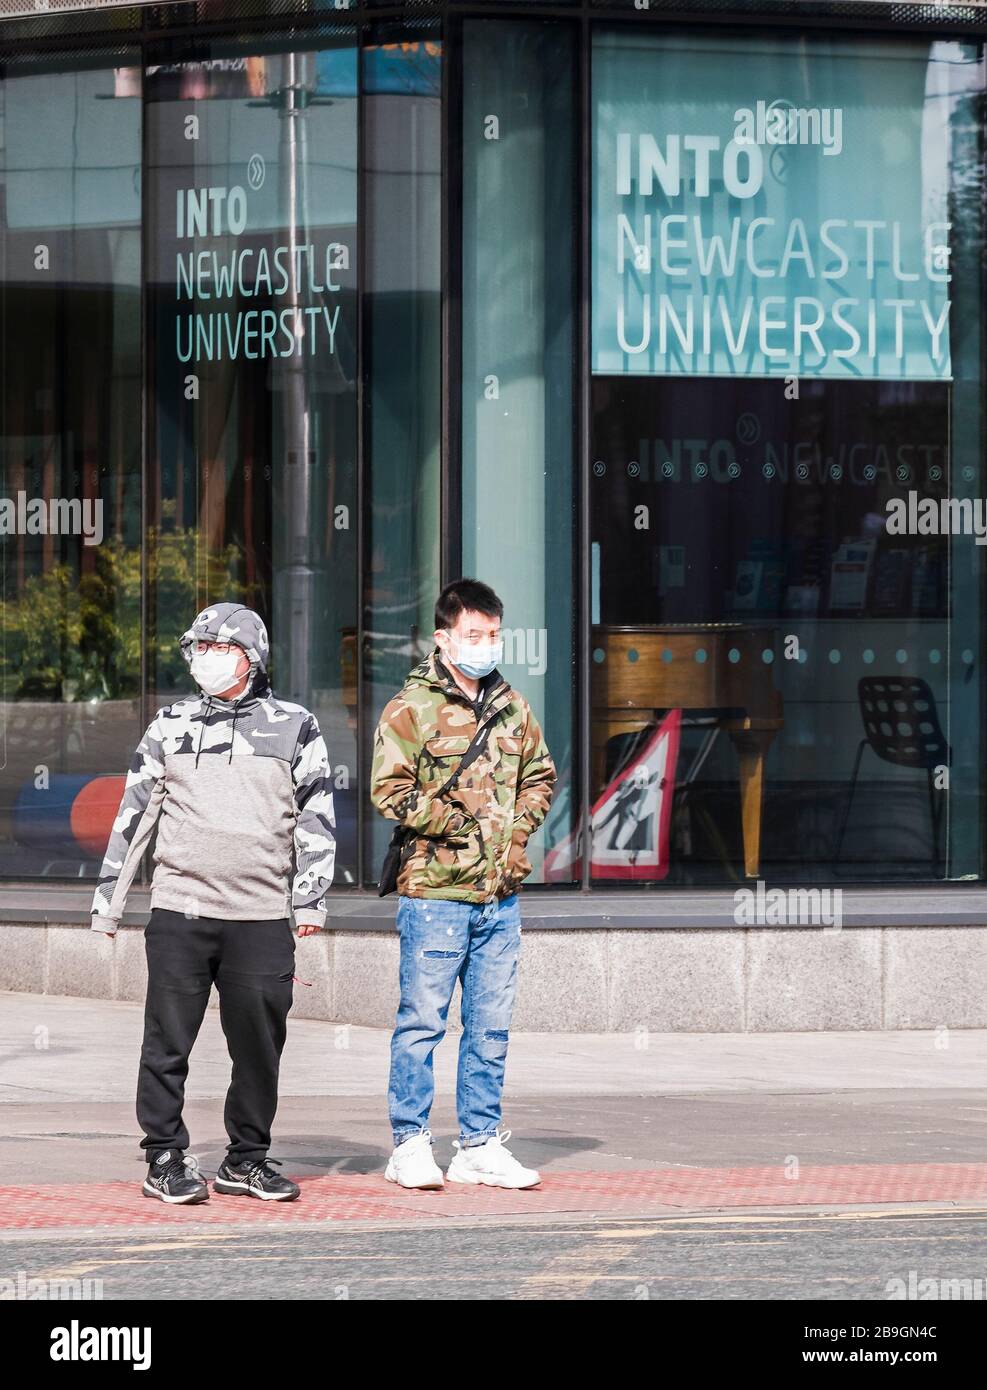 Newcastle upon Tyne, UK, 22nd March 2020. Two asian males wait to cross a road wearing protective masks during the covid-19 pandenic. Joseph Gaul/Alamy News Stock Photo